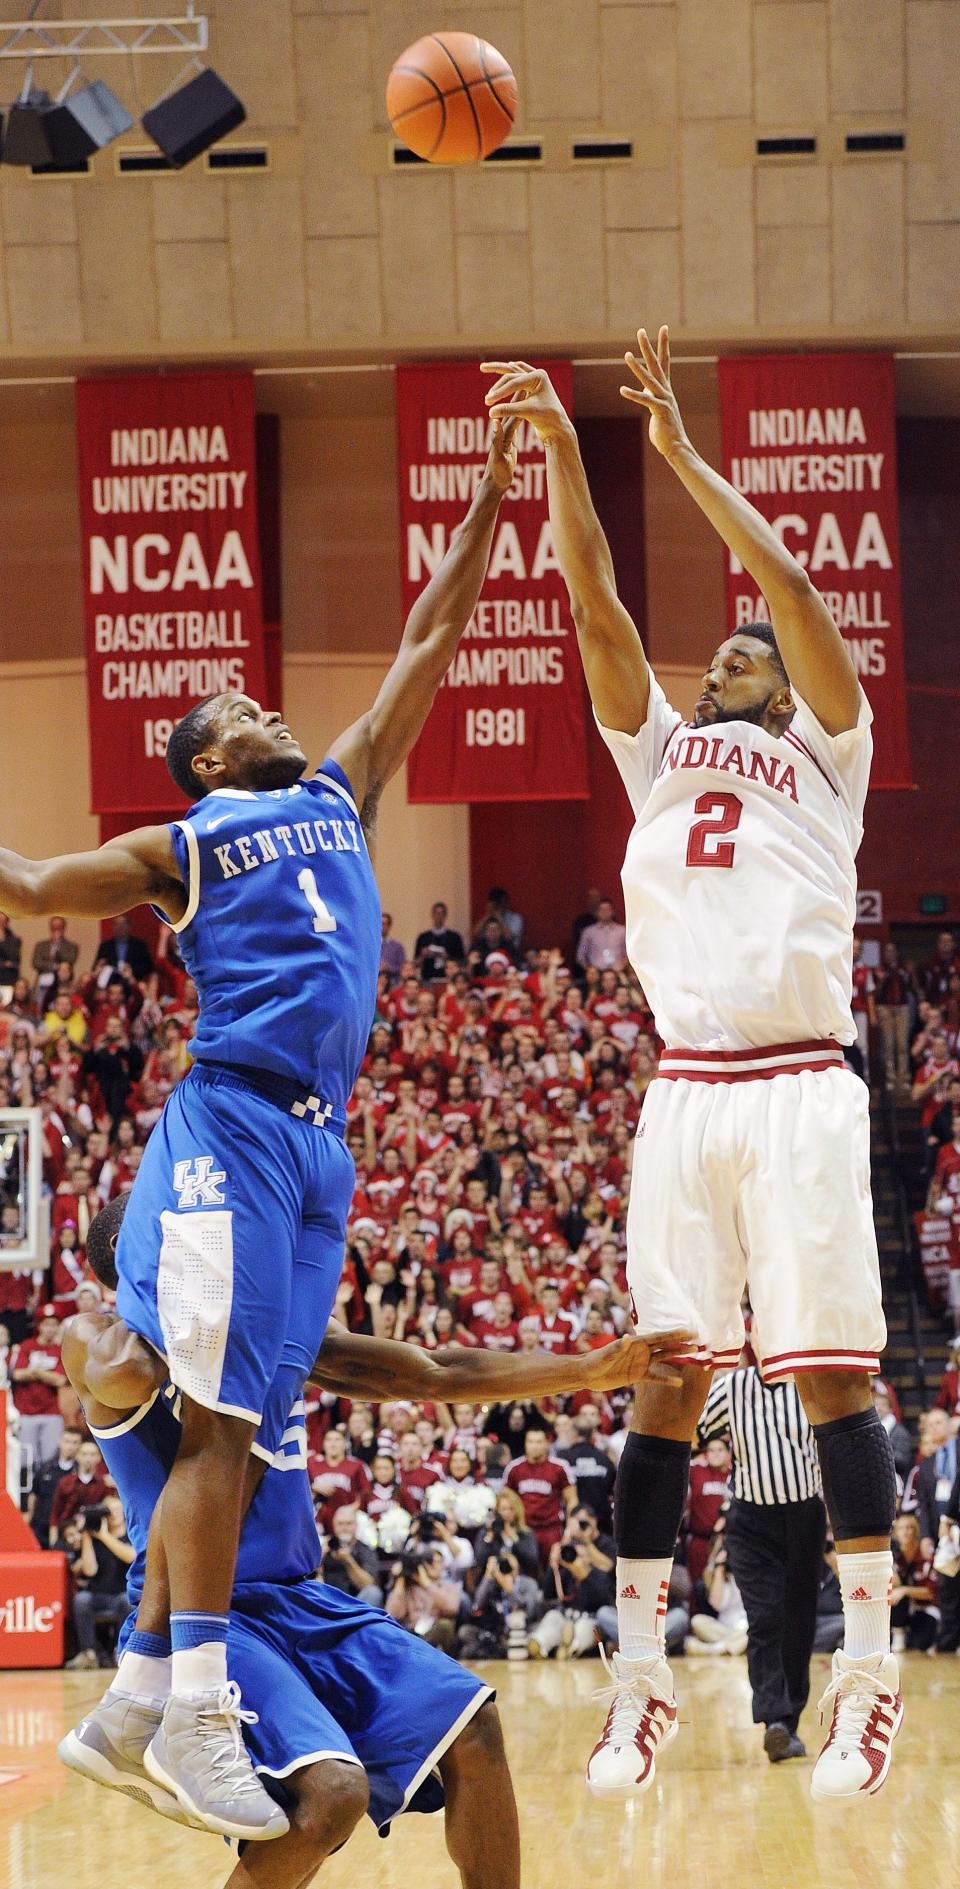 Christian Watford hits the game winning shot as time runs out. Defending is Kentucky's Darius Miller. IU defeated number one ranked Kentucky in men's basketball 73-72 at Assembly Hall in Bloomington Saturday December, 10, 2011. Rob Goebel/The Star.